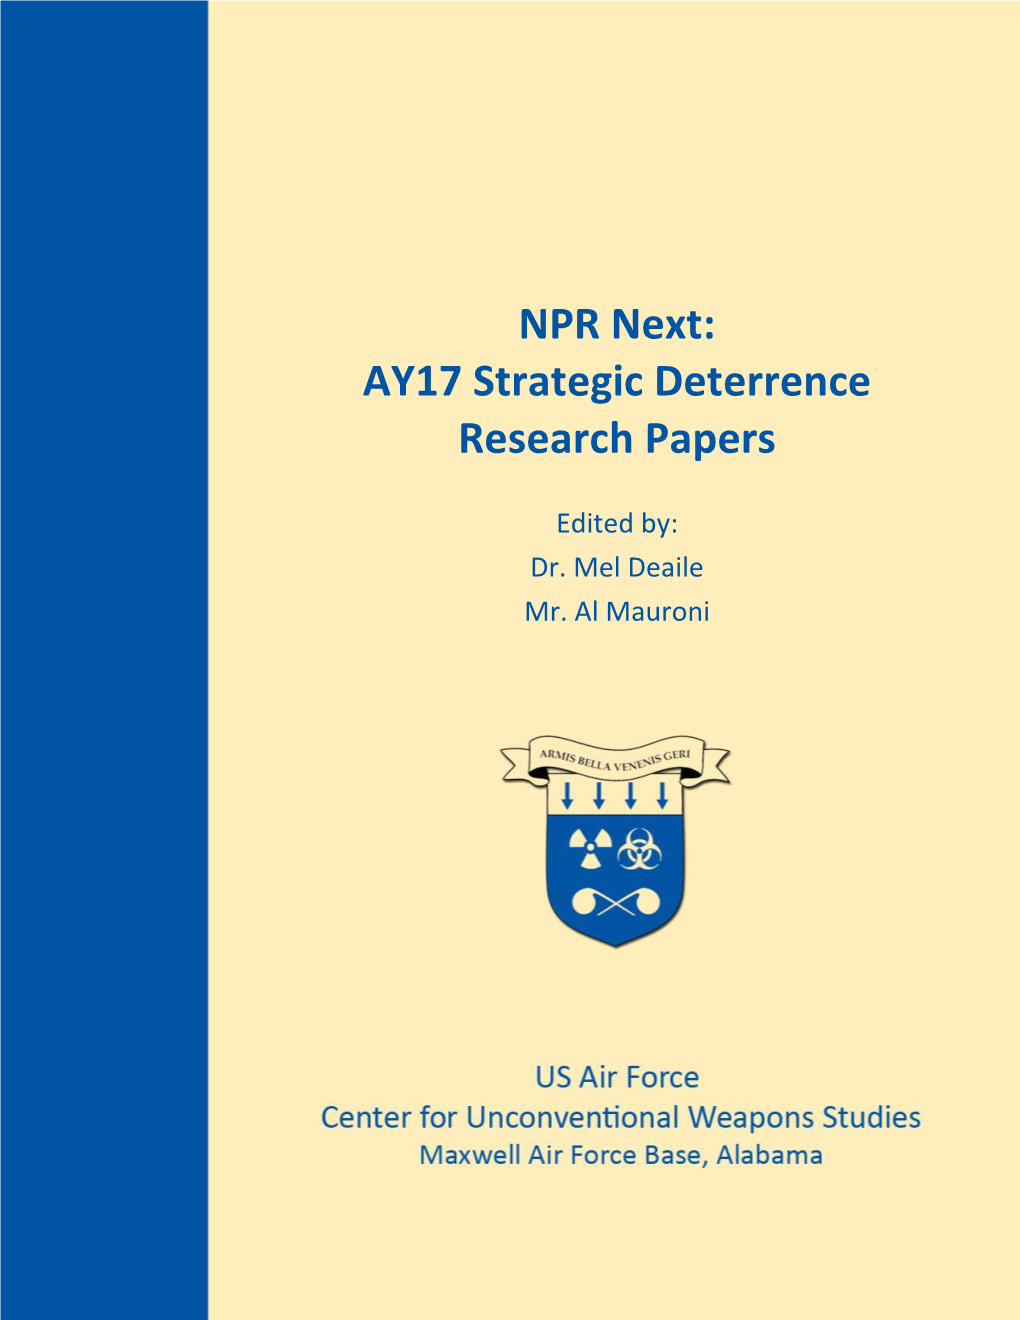 NPR Next: AY17 Strategic Deterrence Research Papers, 2017